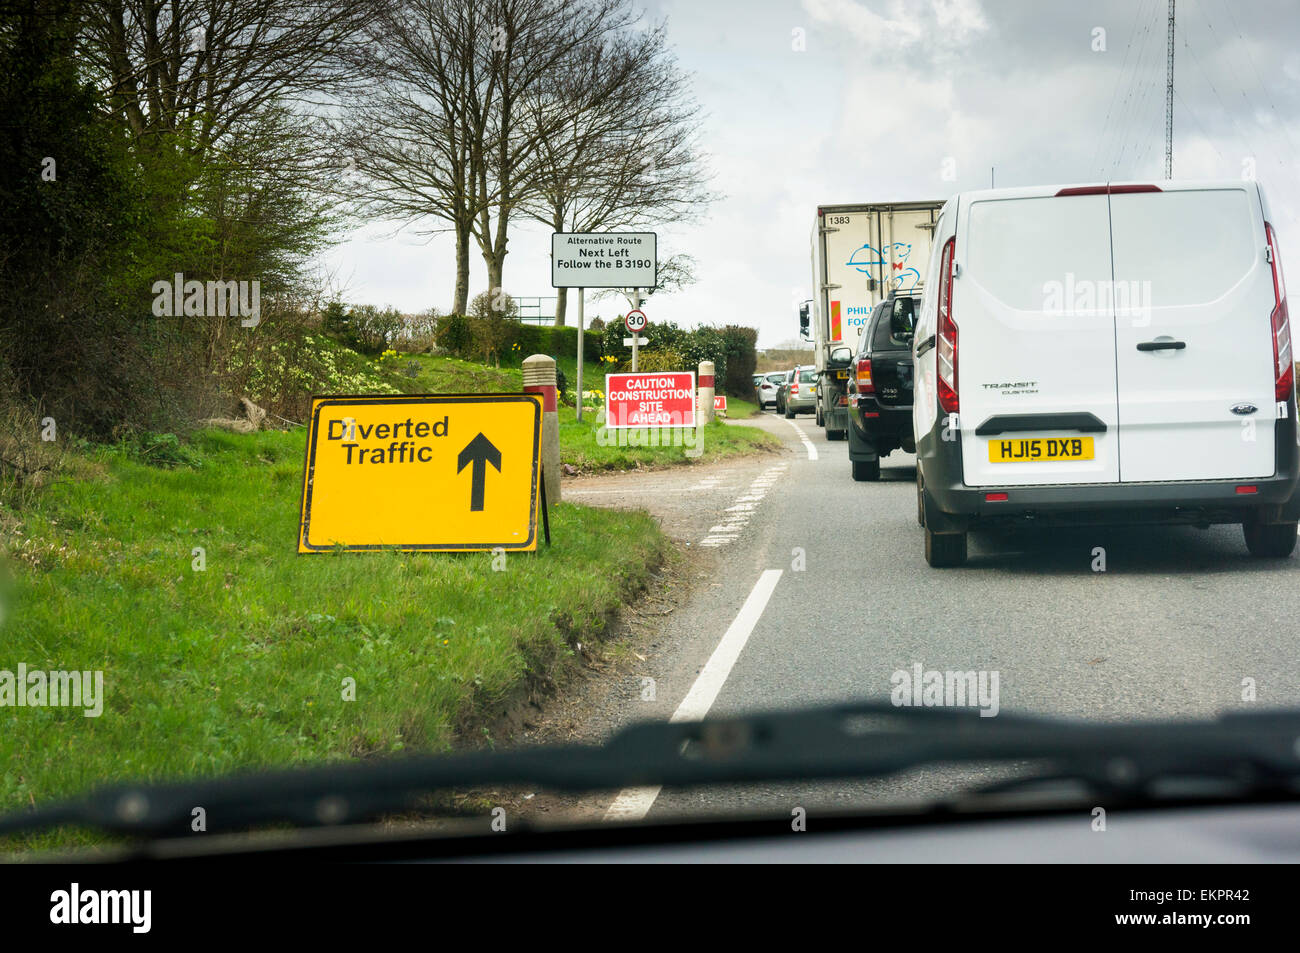 Traffic jam on a country road with diverted traffic sign at road works, England, UK Stock Photo